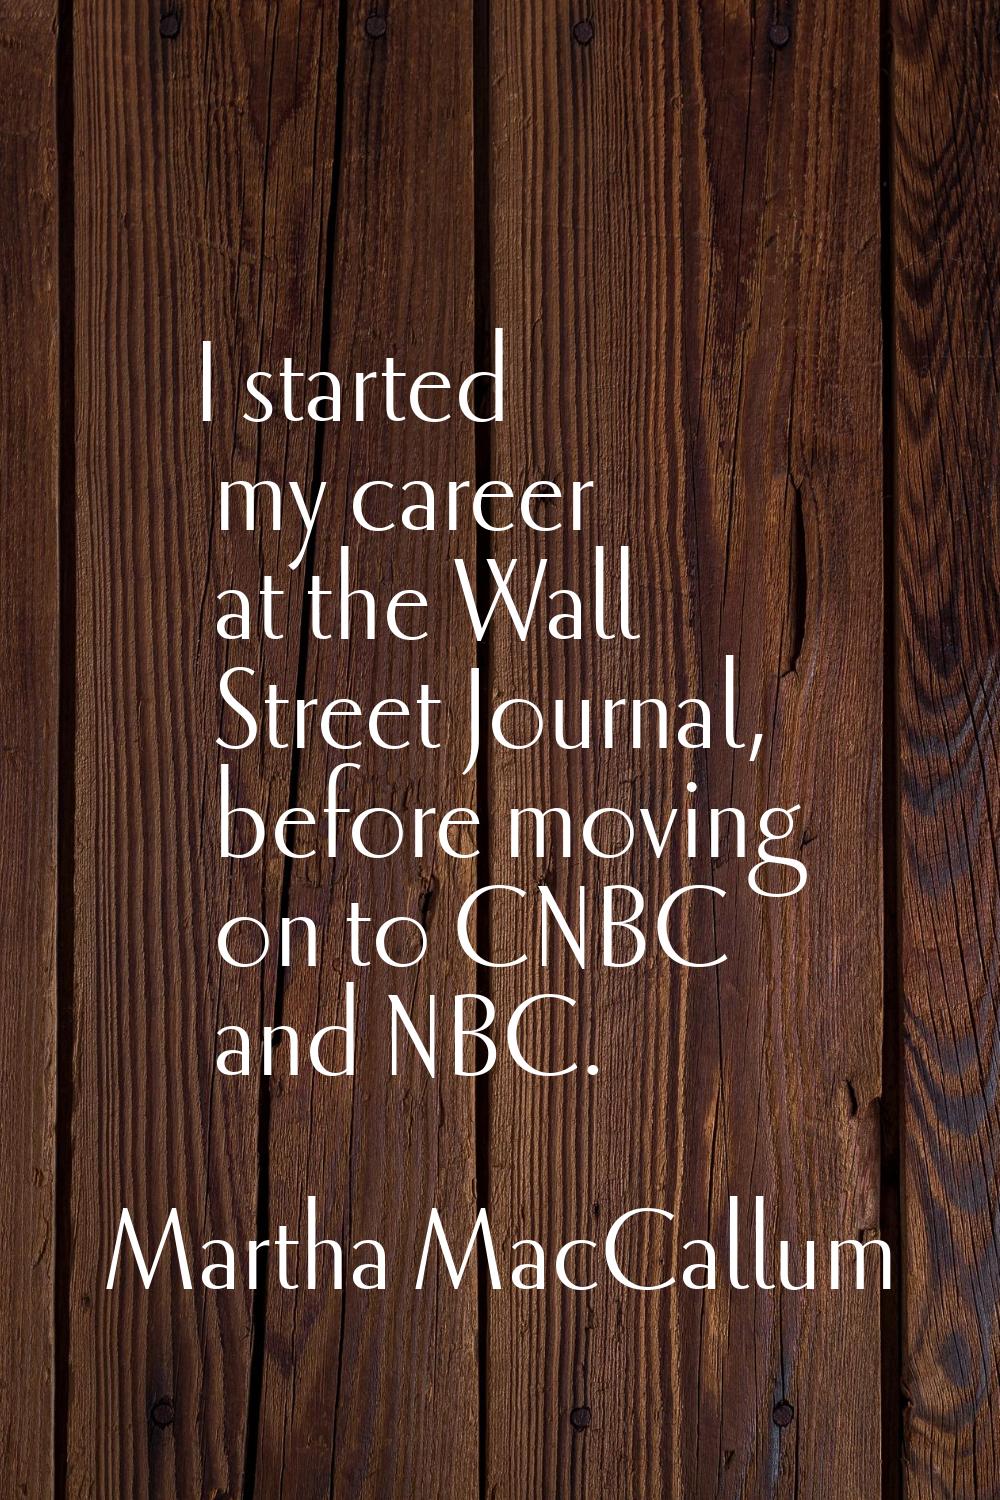 I started my career at the Wall Street Journal, before moving on to CNBC and NBC.